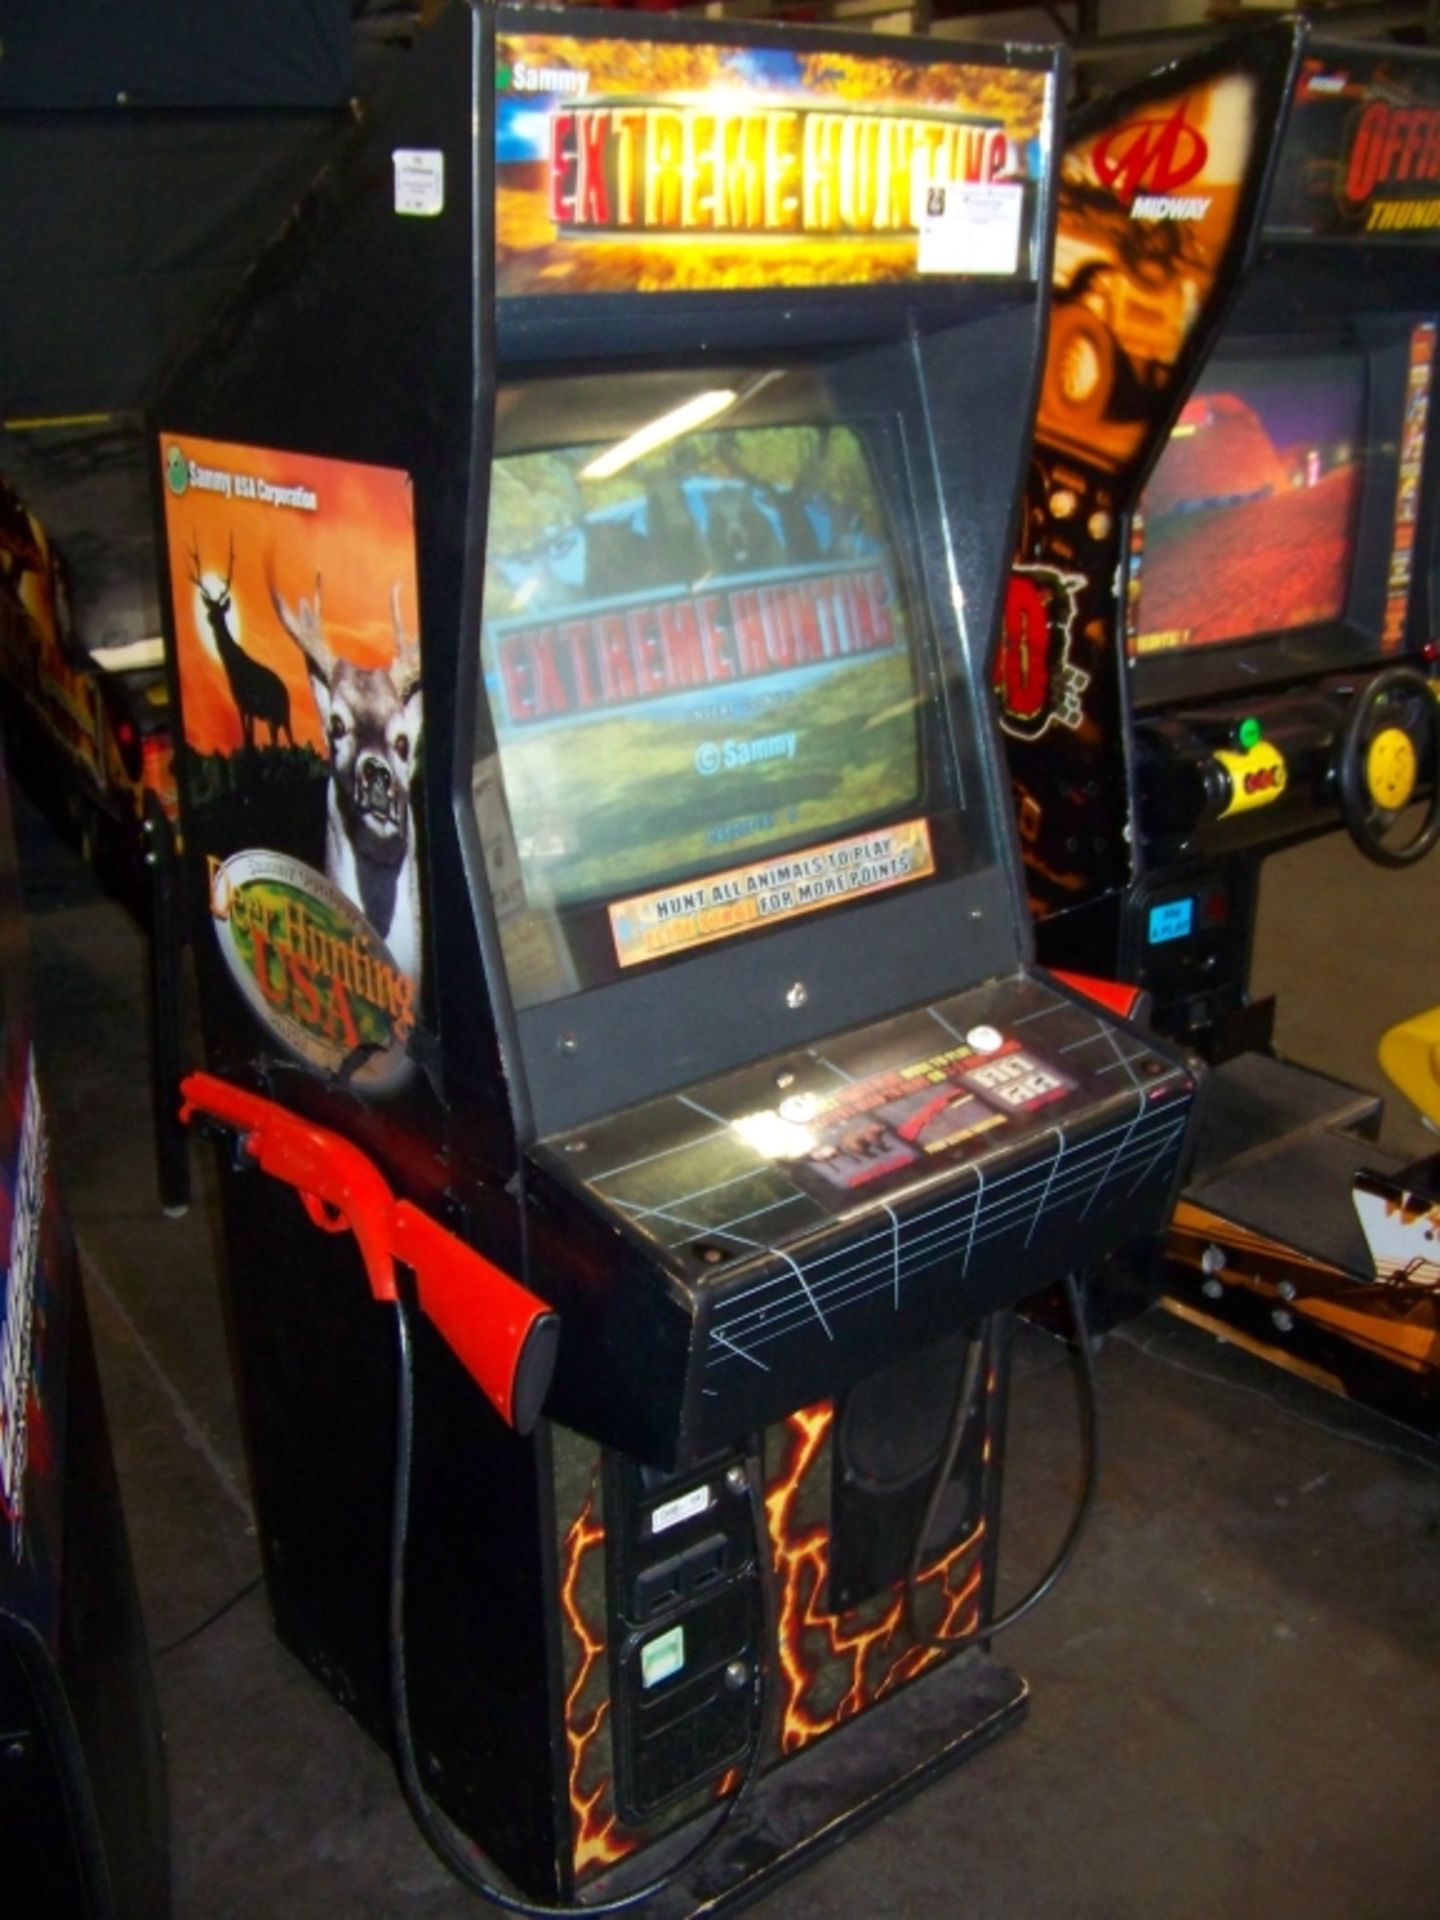 EXTREME HUNTING SHOOTER ARCADE GAME - Image 2 of 3